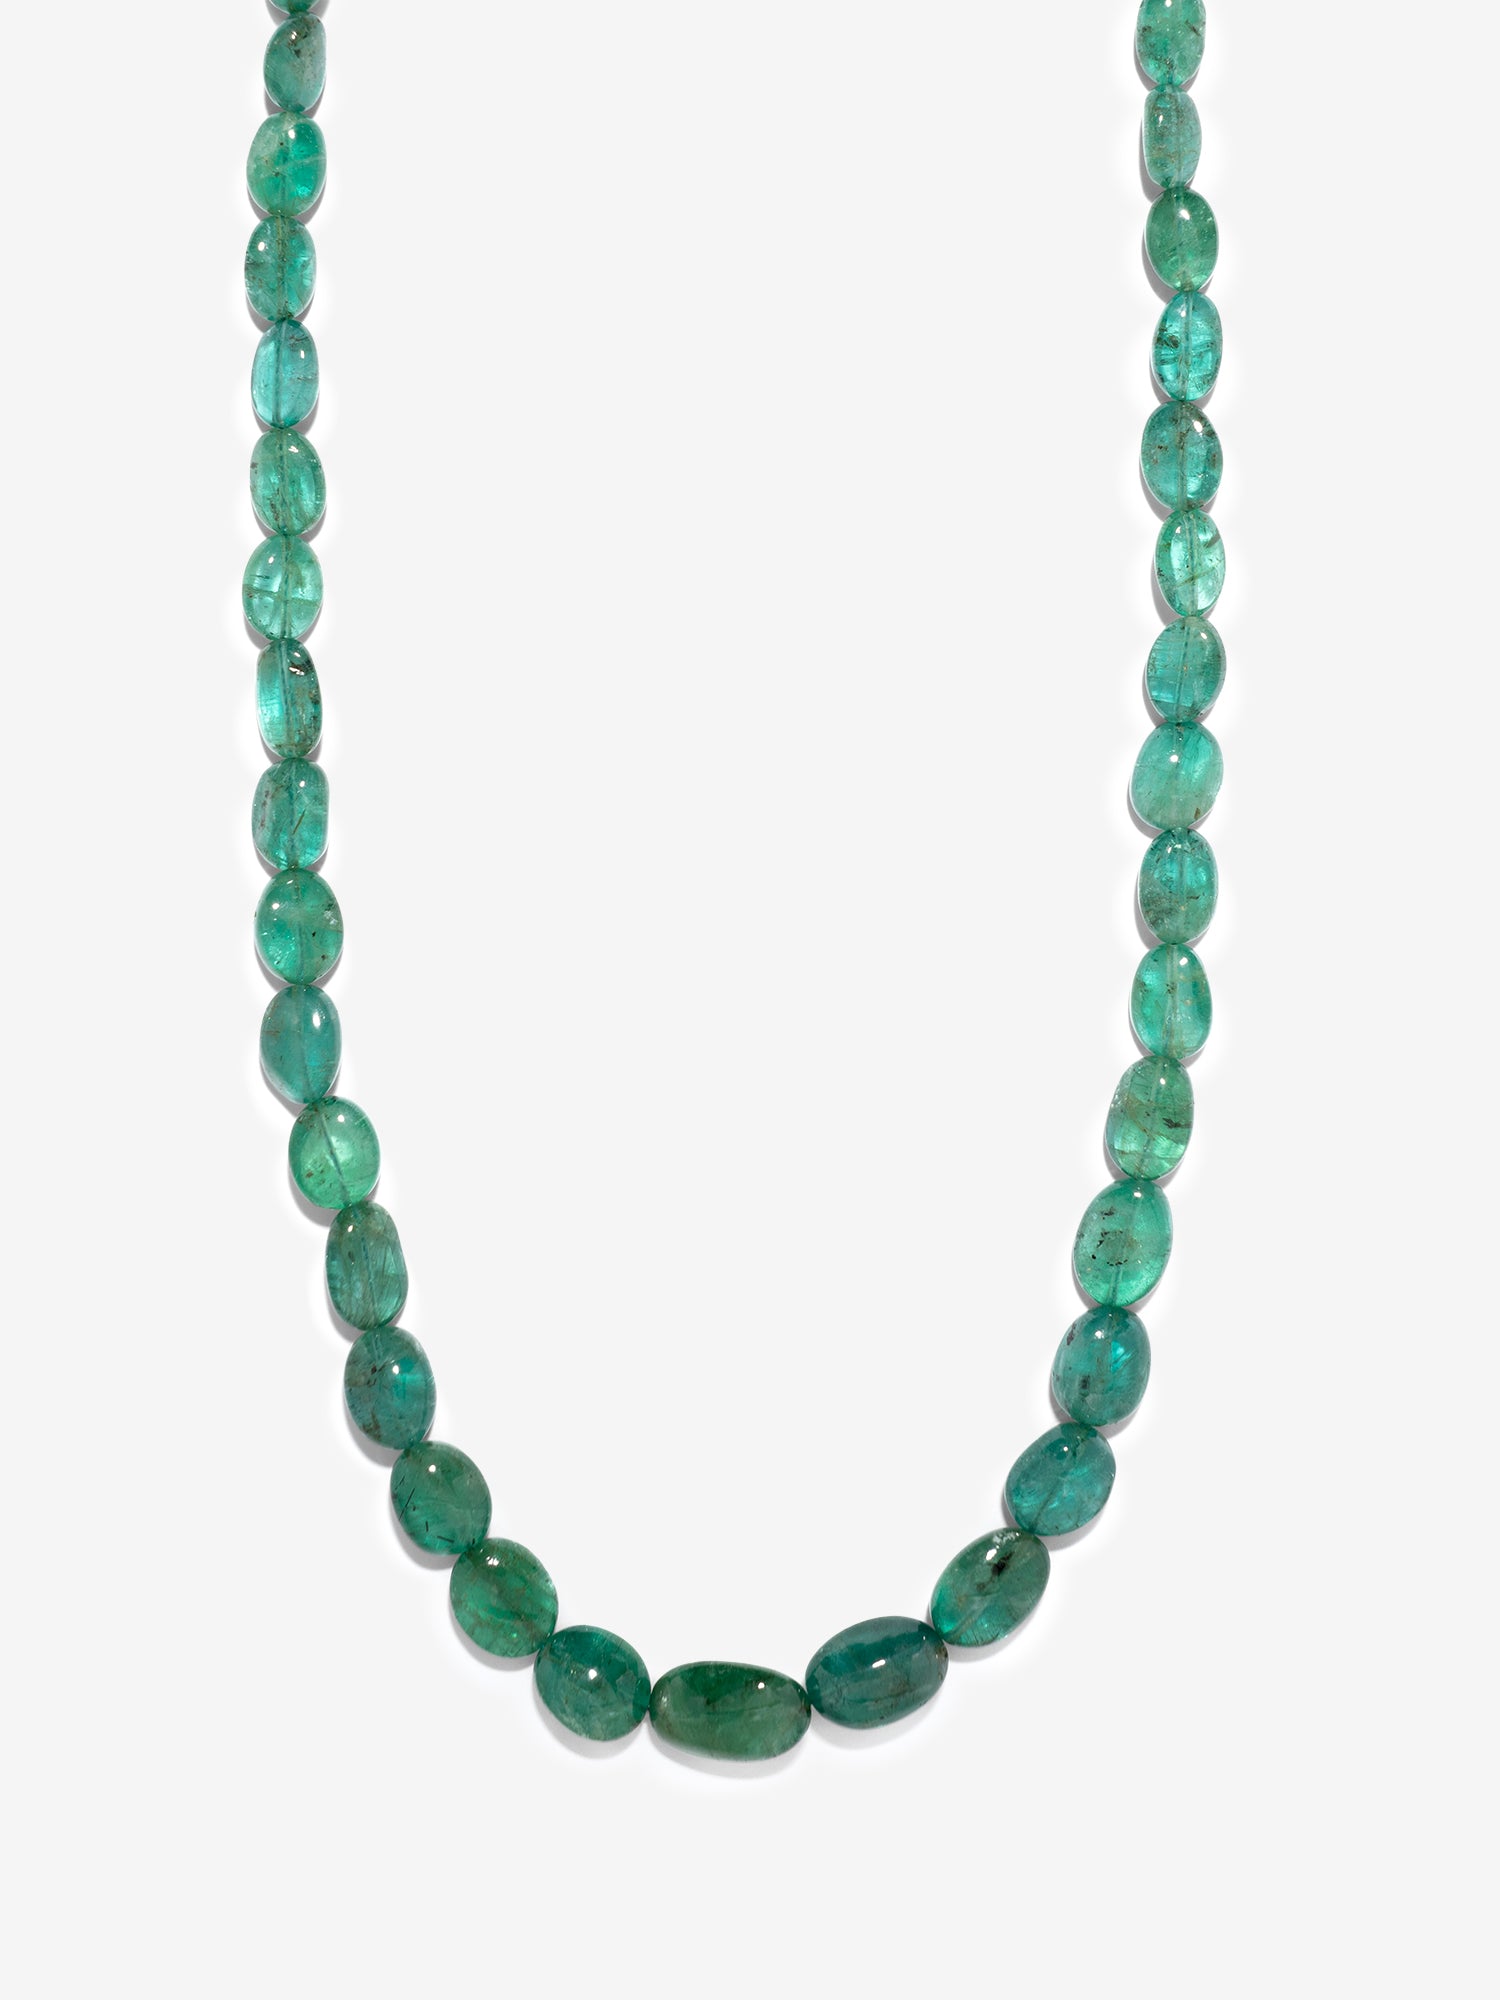 Emerald Oval Bead Necklace